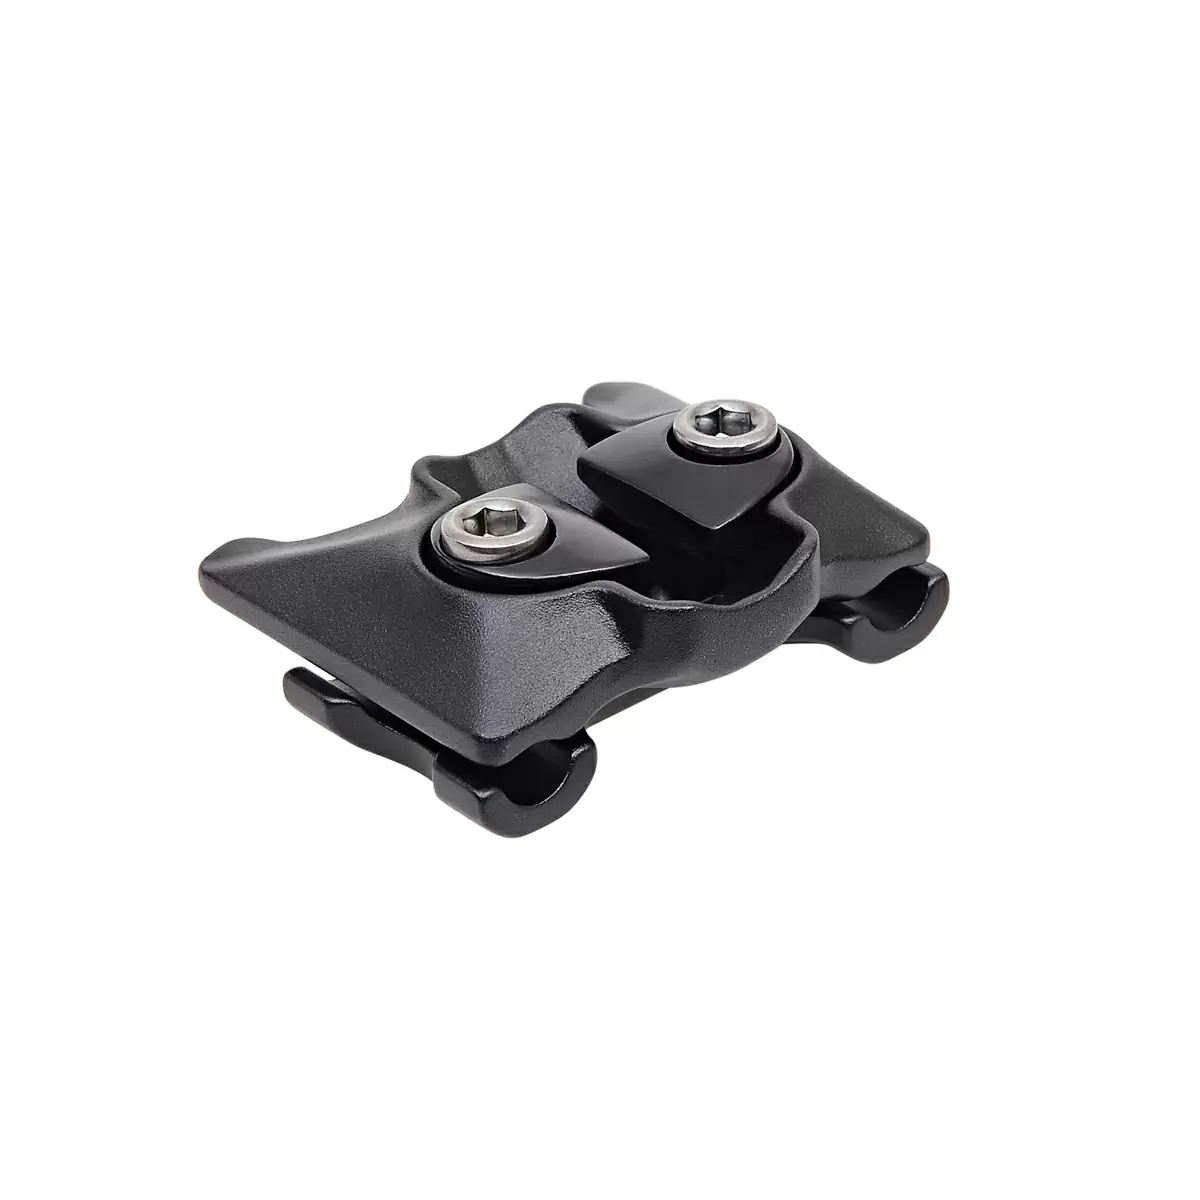 Seatpost adapter for monolink to standard conversion - image